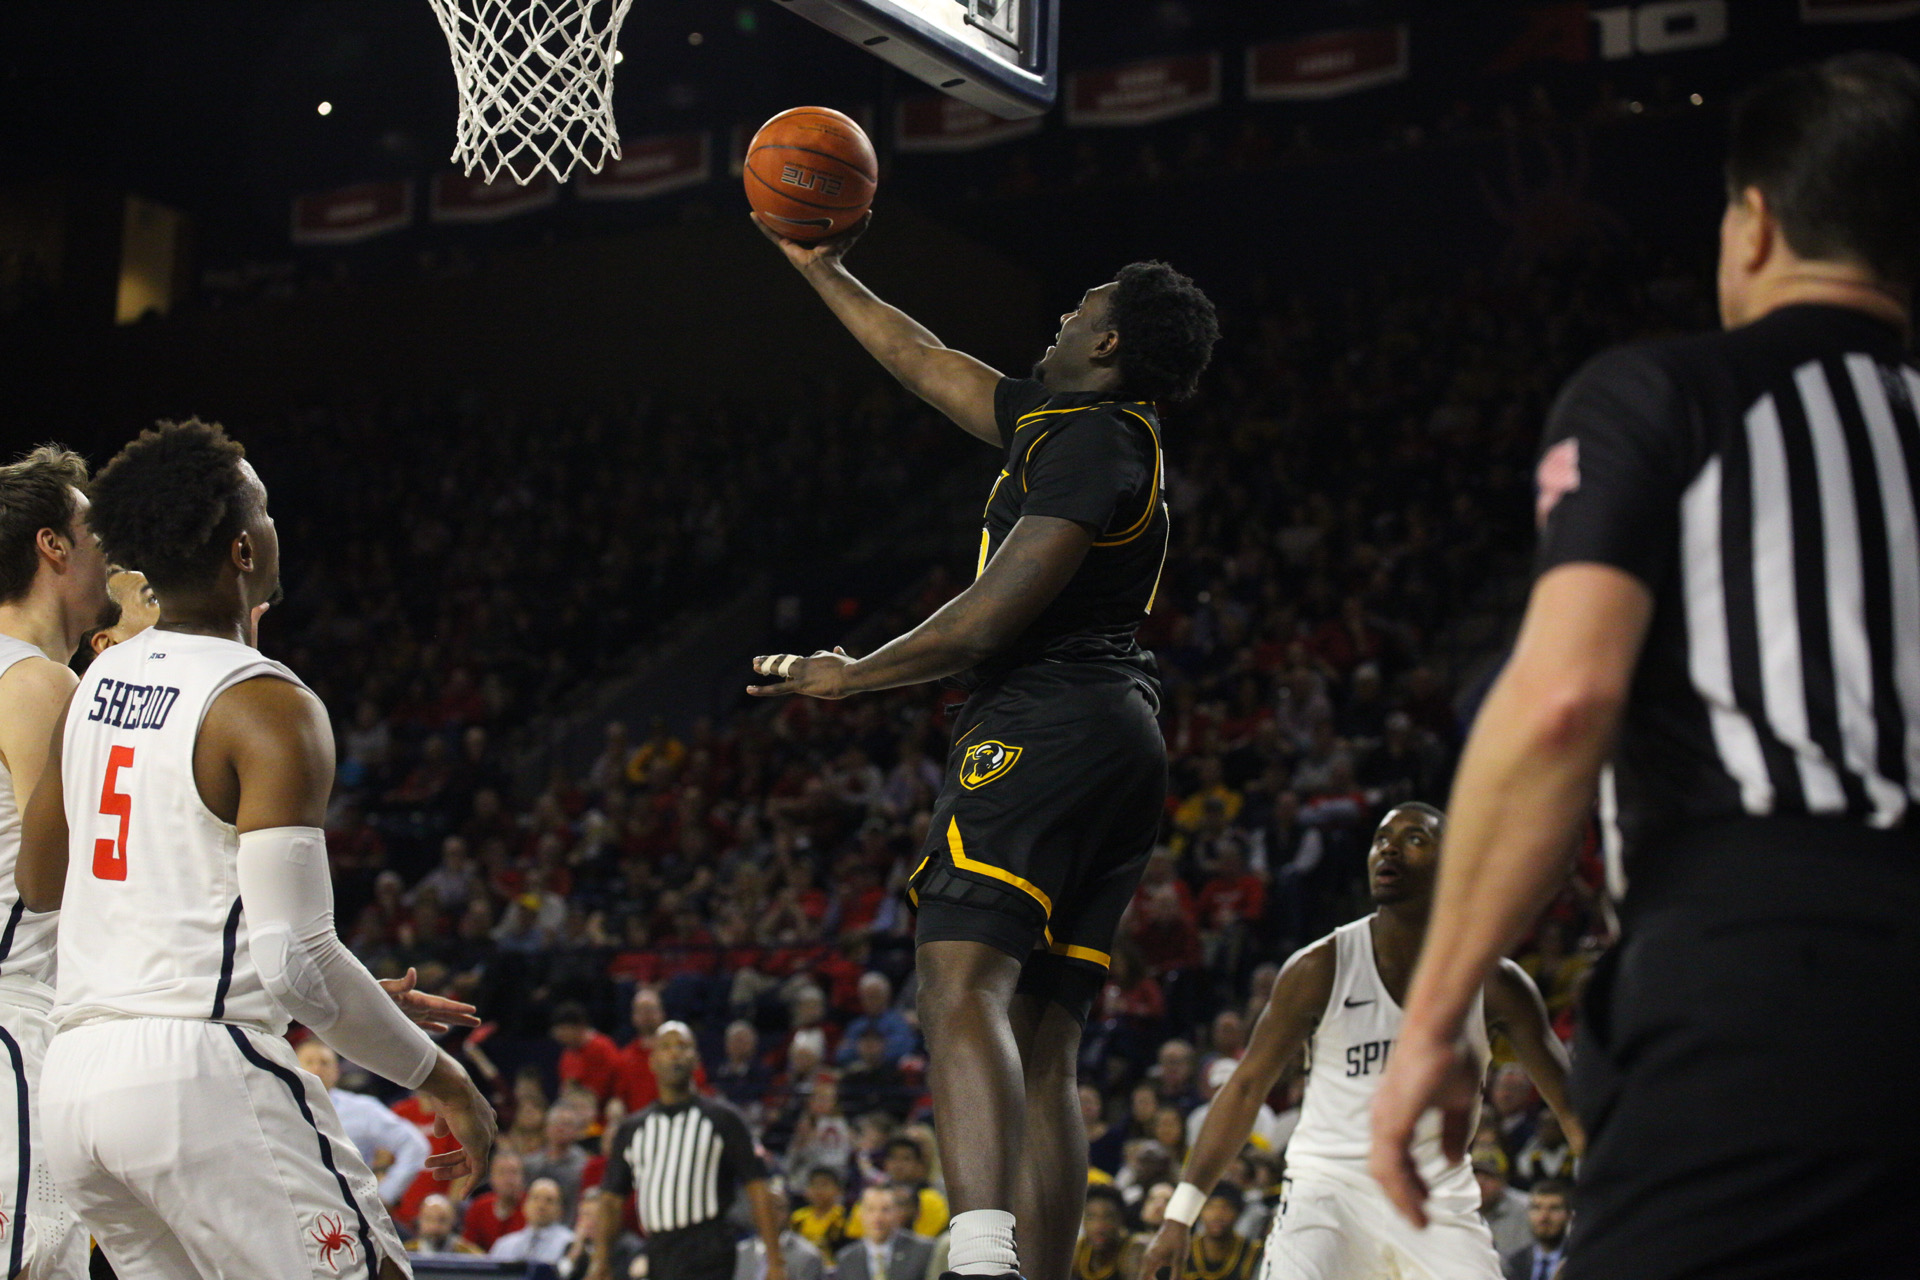 VCU men’s basketball fall to Richmond as 3-point shooting woes continue